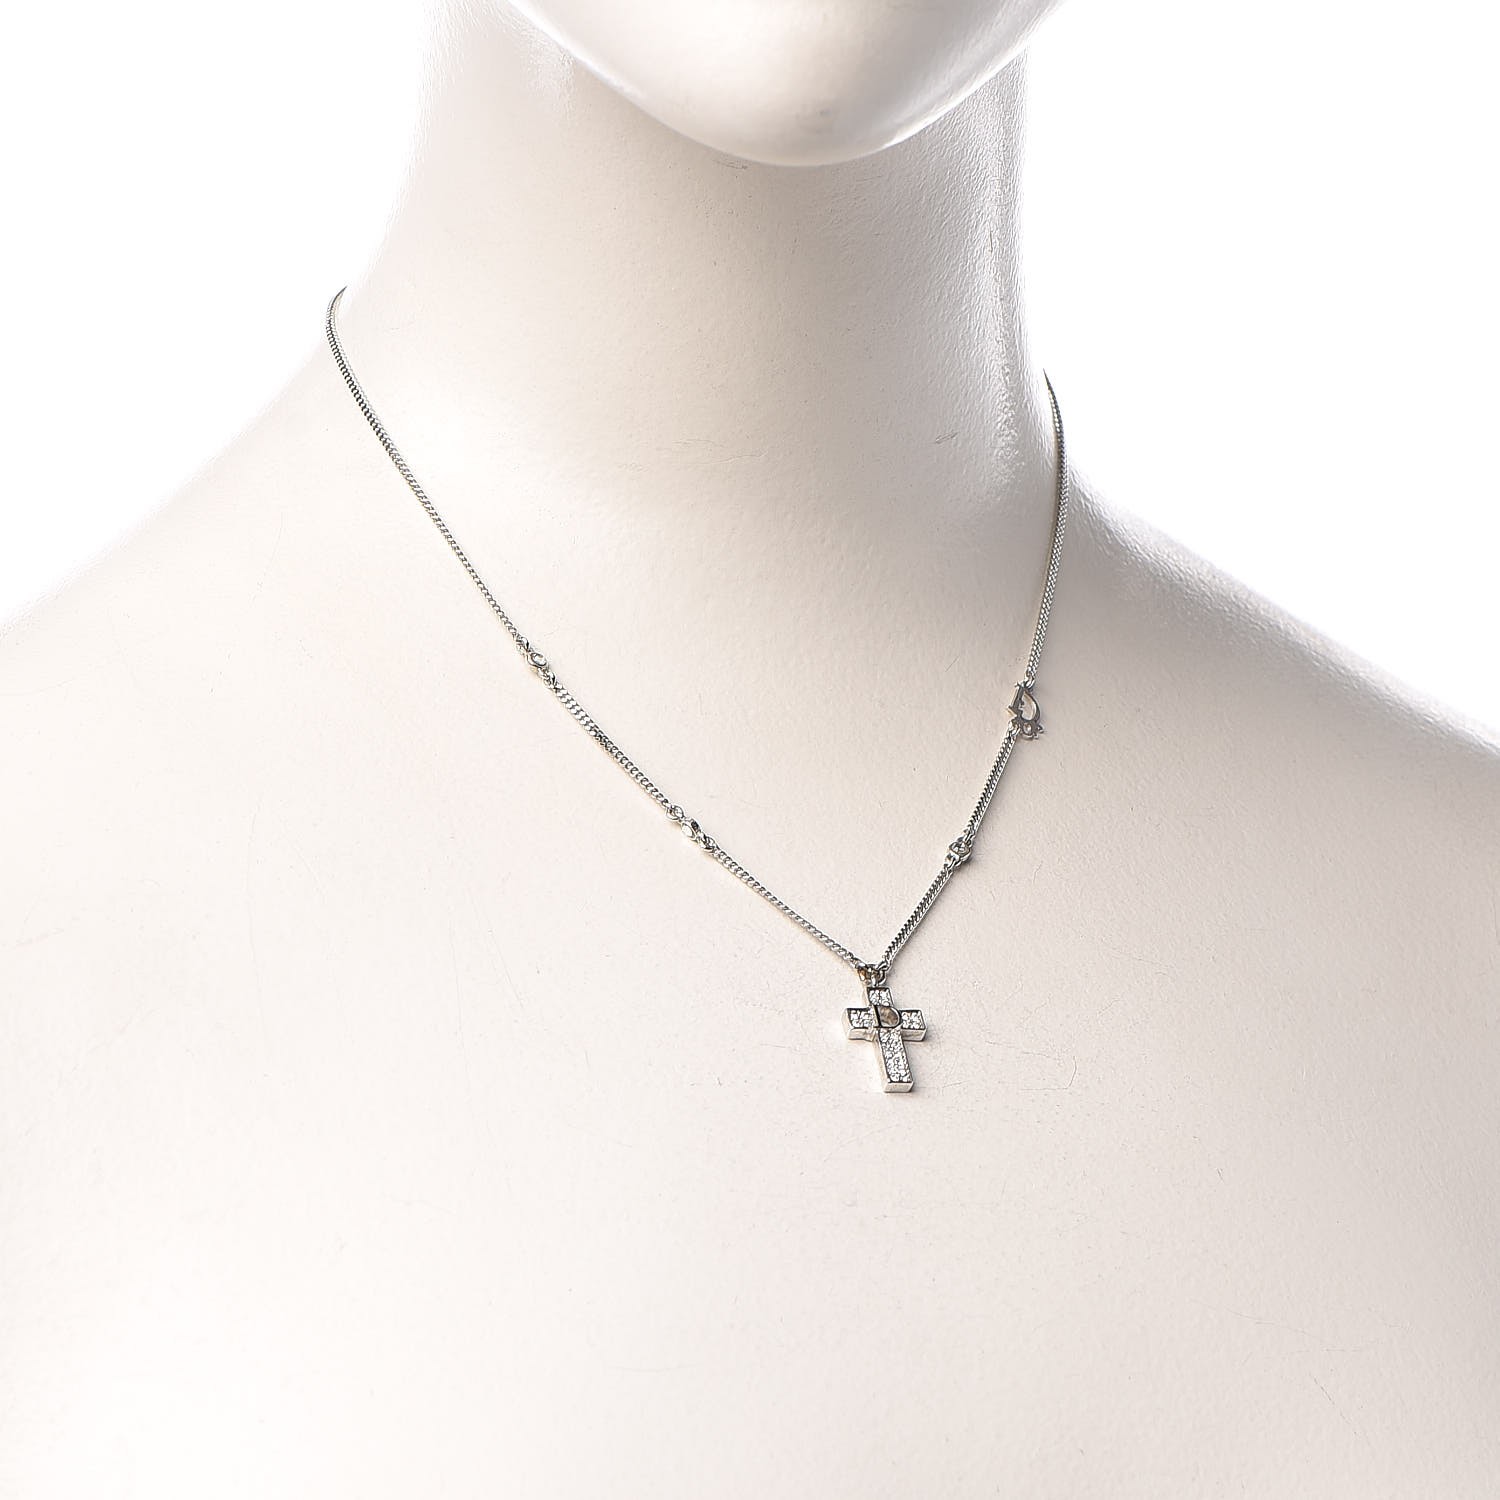 CHRISTIAN DIOR Crystal Cross Necklace 